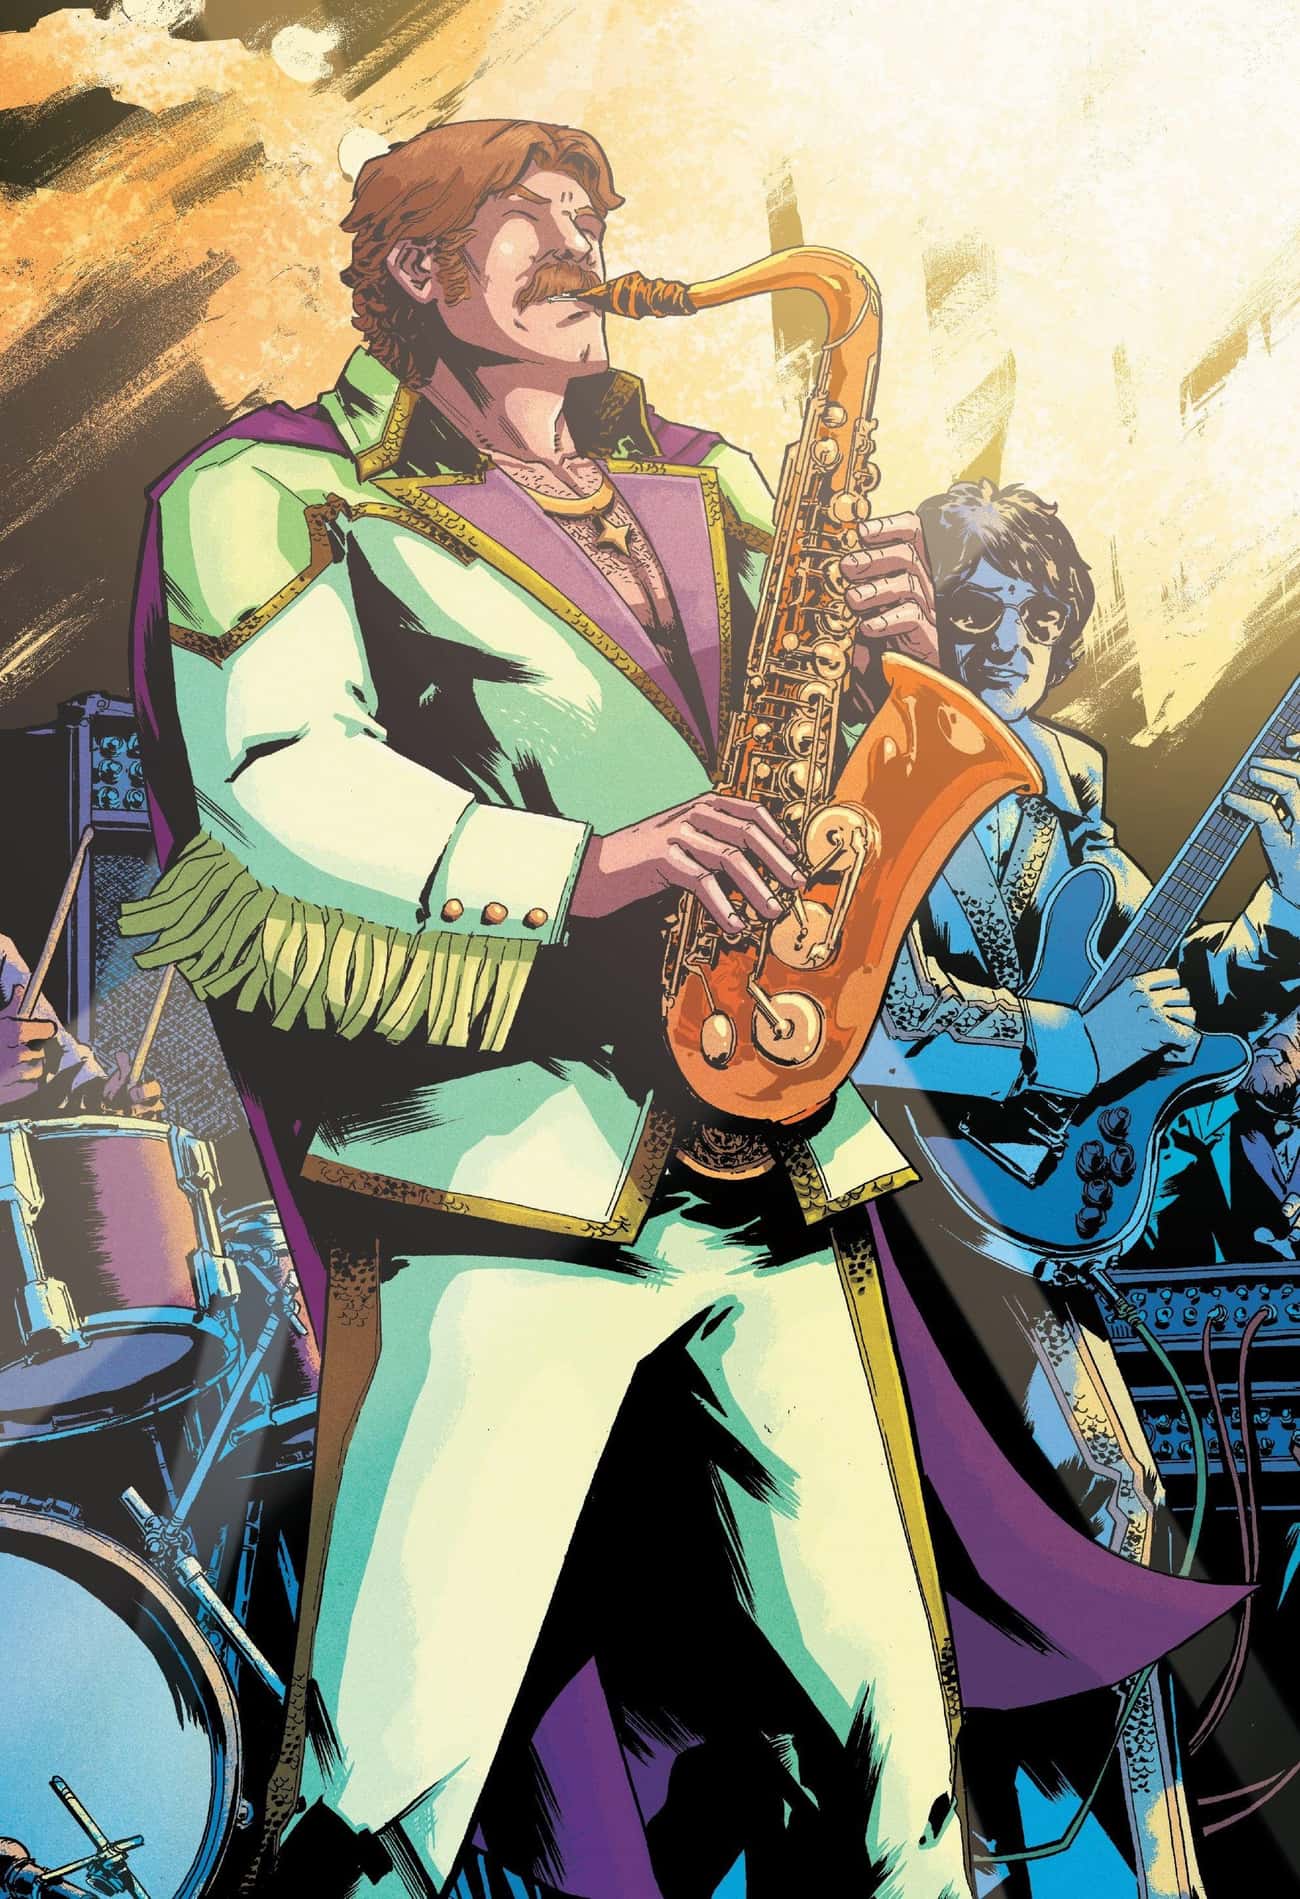 Drax Was A Human Saxophone Player Empowered To Take Cosmic Revenge On Thanos